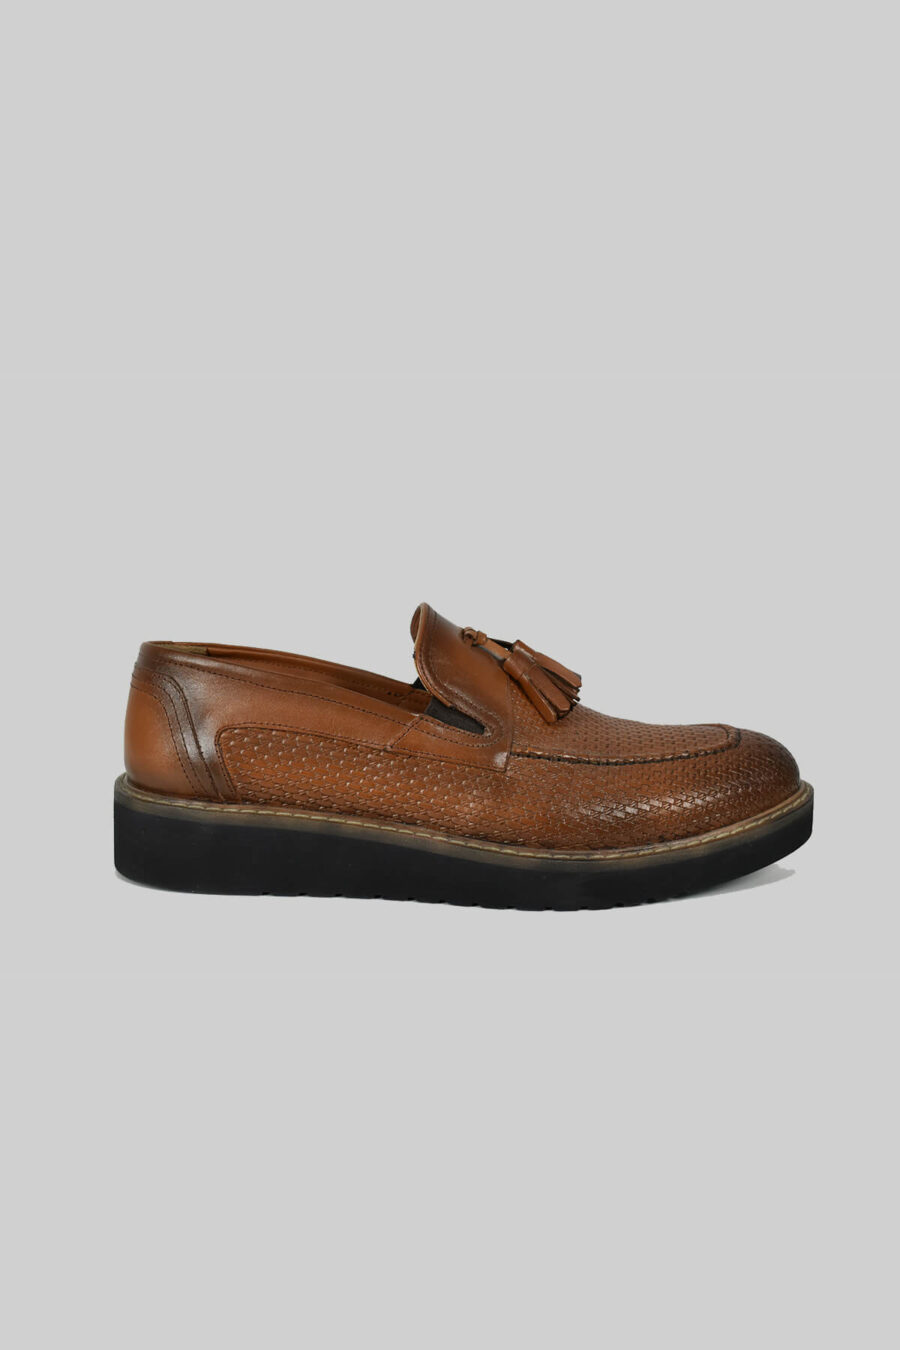 Fenomilano Leather Loafer